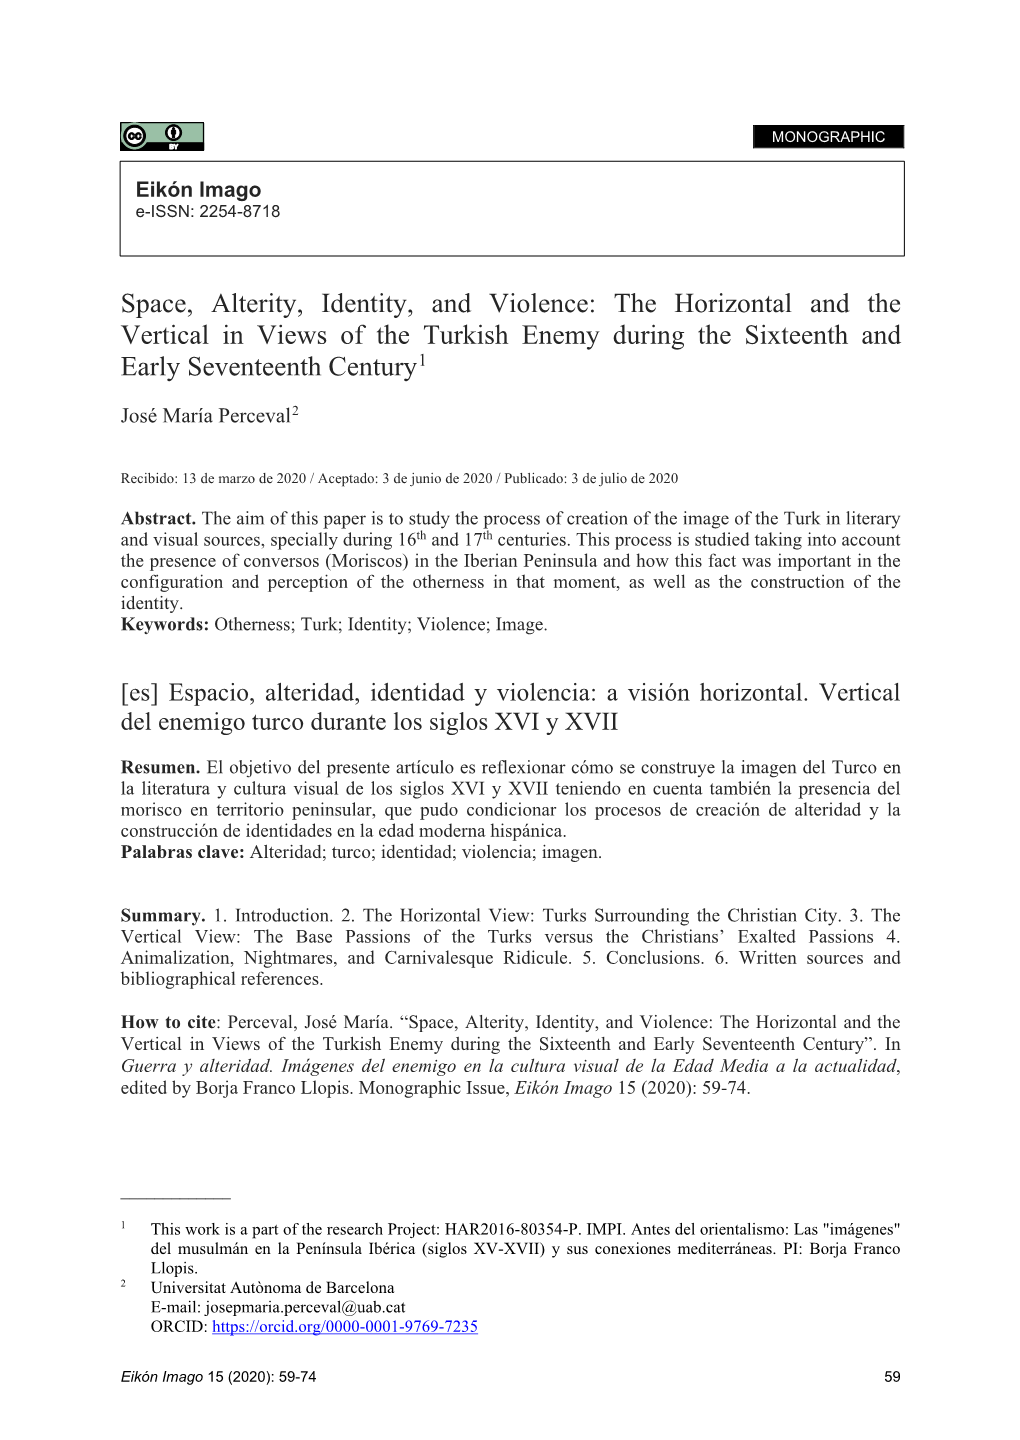 Space, Alterity, Identity, and Violence: the Horizontal and the Vertical in Views of the Turkish Enemy During the Sixteenth and Early Seventeenth Century1